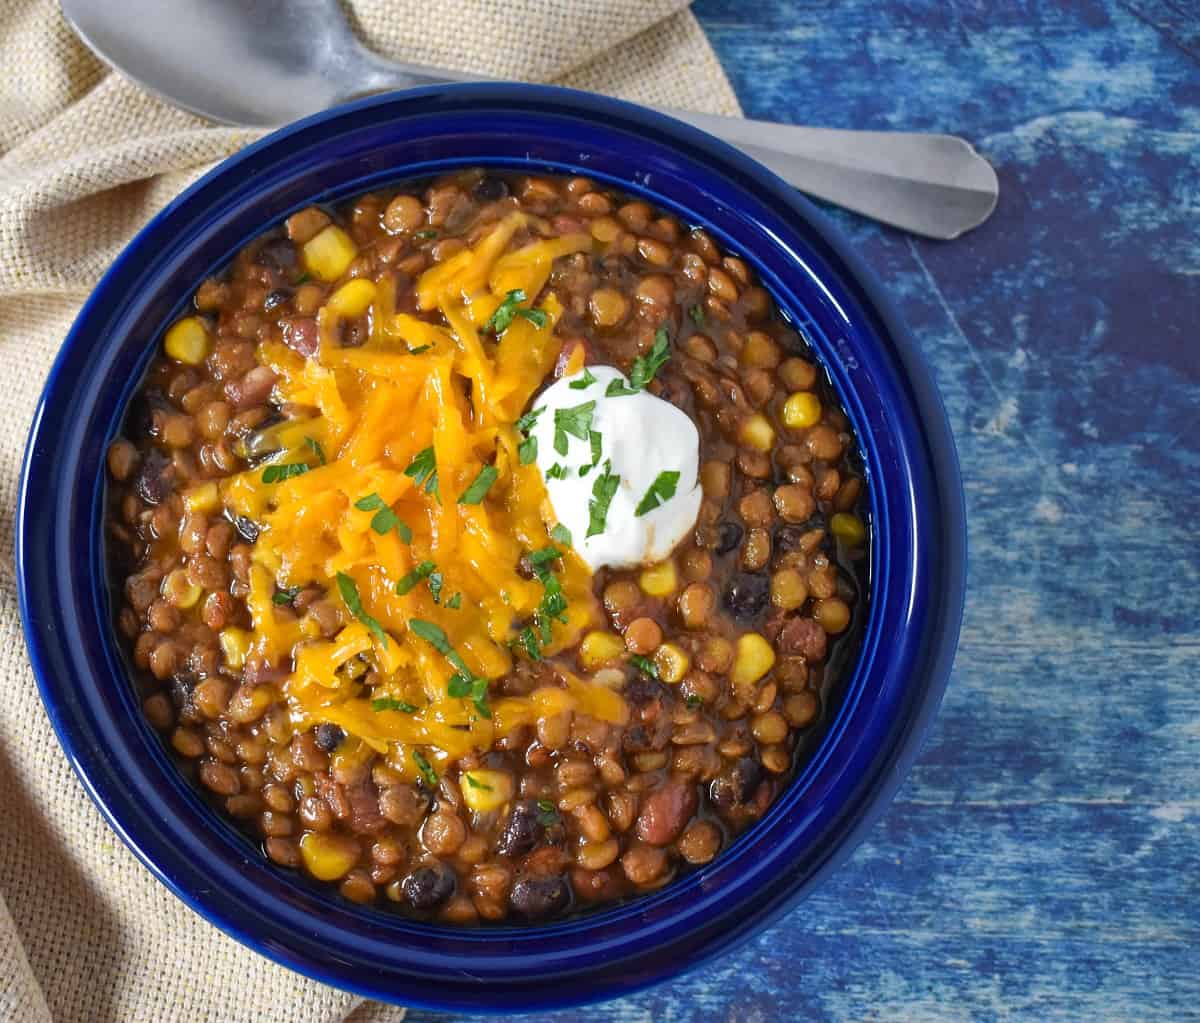 The lentil chili served in a blue bowl with a beige colored linen and a spoon on the side. The chili is garnished with melted cheddar cheese and a dollop of sour cream.